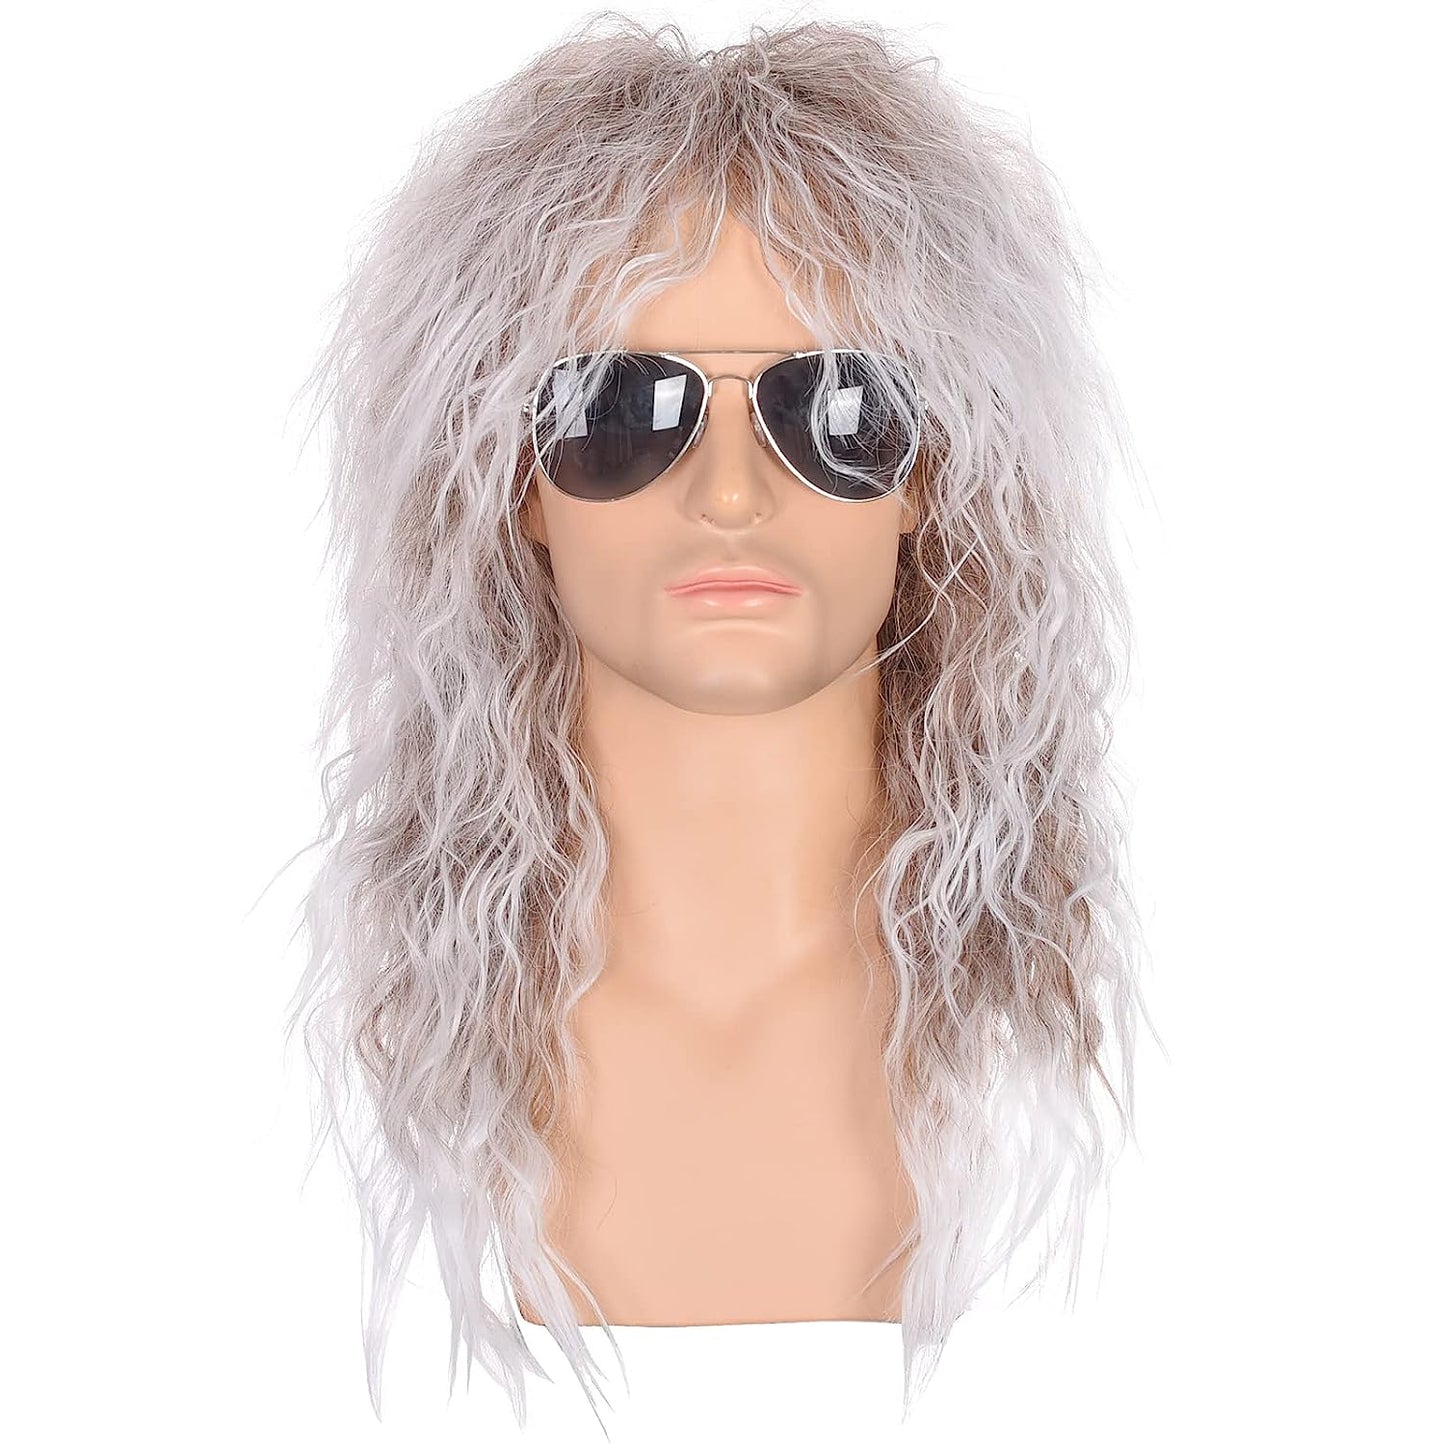 Heavy Metal ROCKER WIG 1980s Hair For Men Long Curly Silver Synthetic Glam Rocker Throwback Retro Look Perfect for Halloween, Cosplay, Costume - Asylum Books